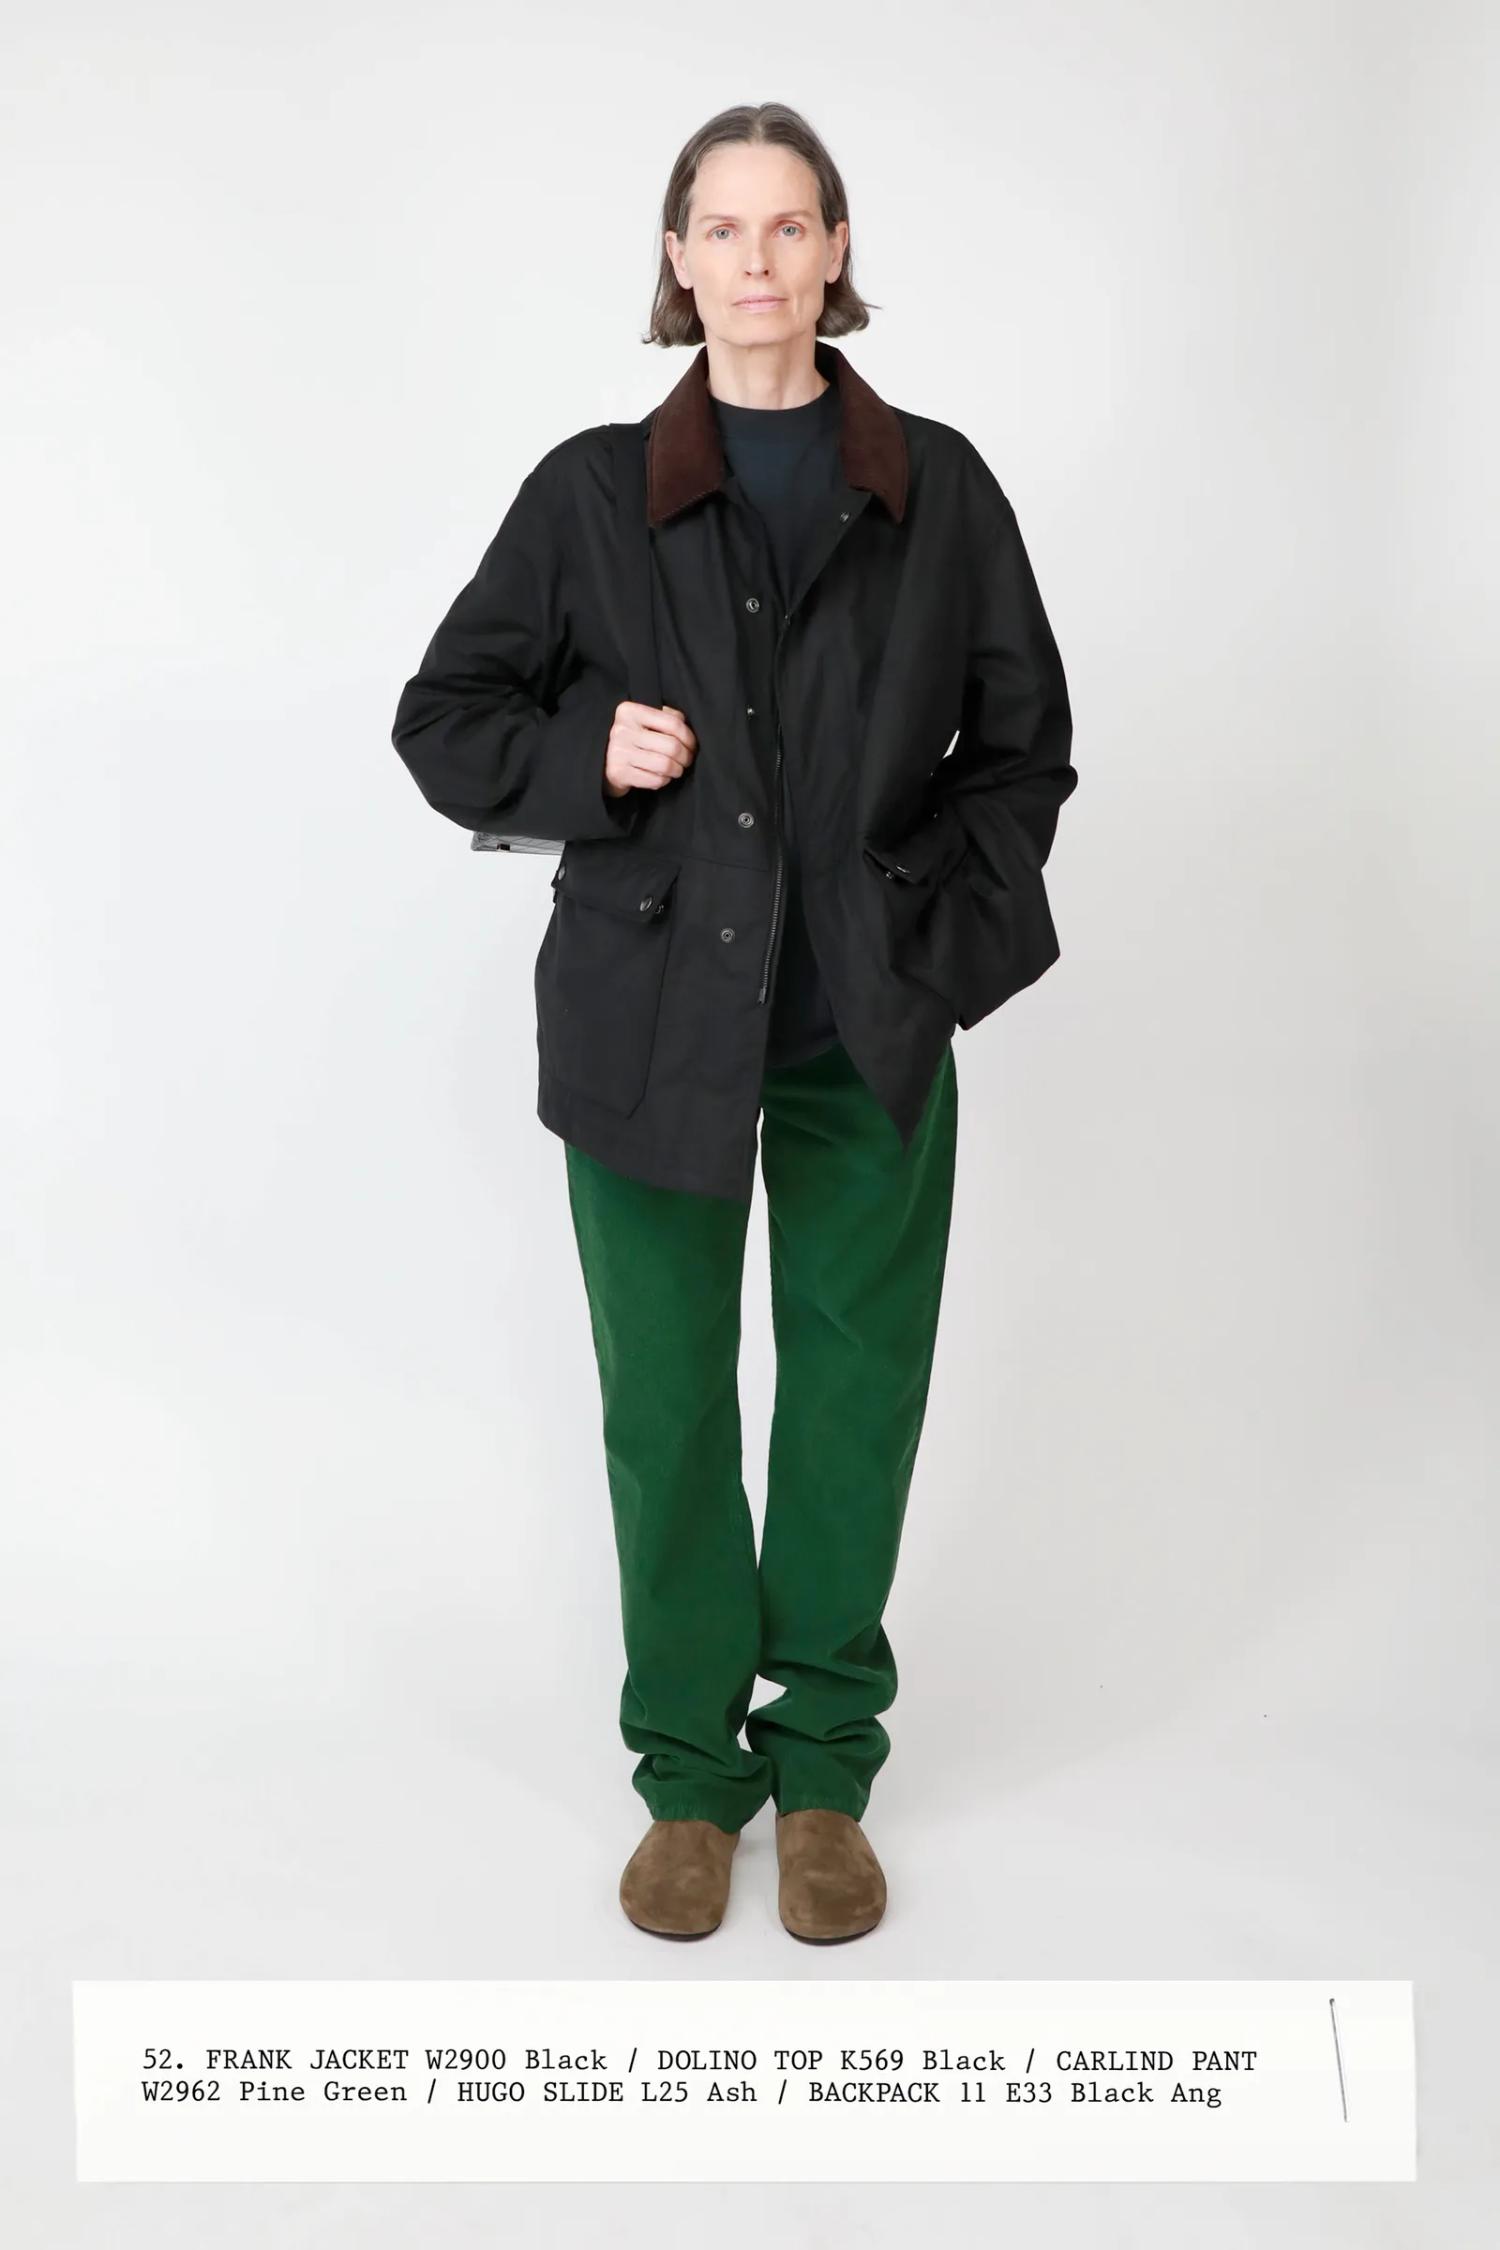 Pine Green Jeans Outfit Neiman Marcus